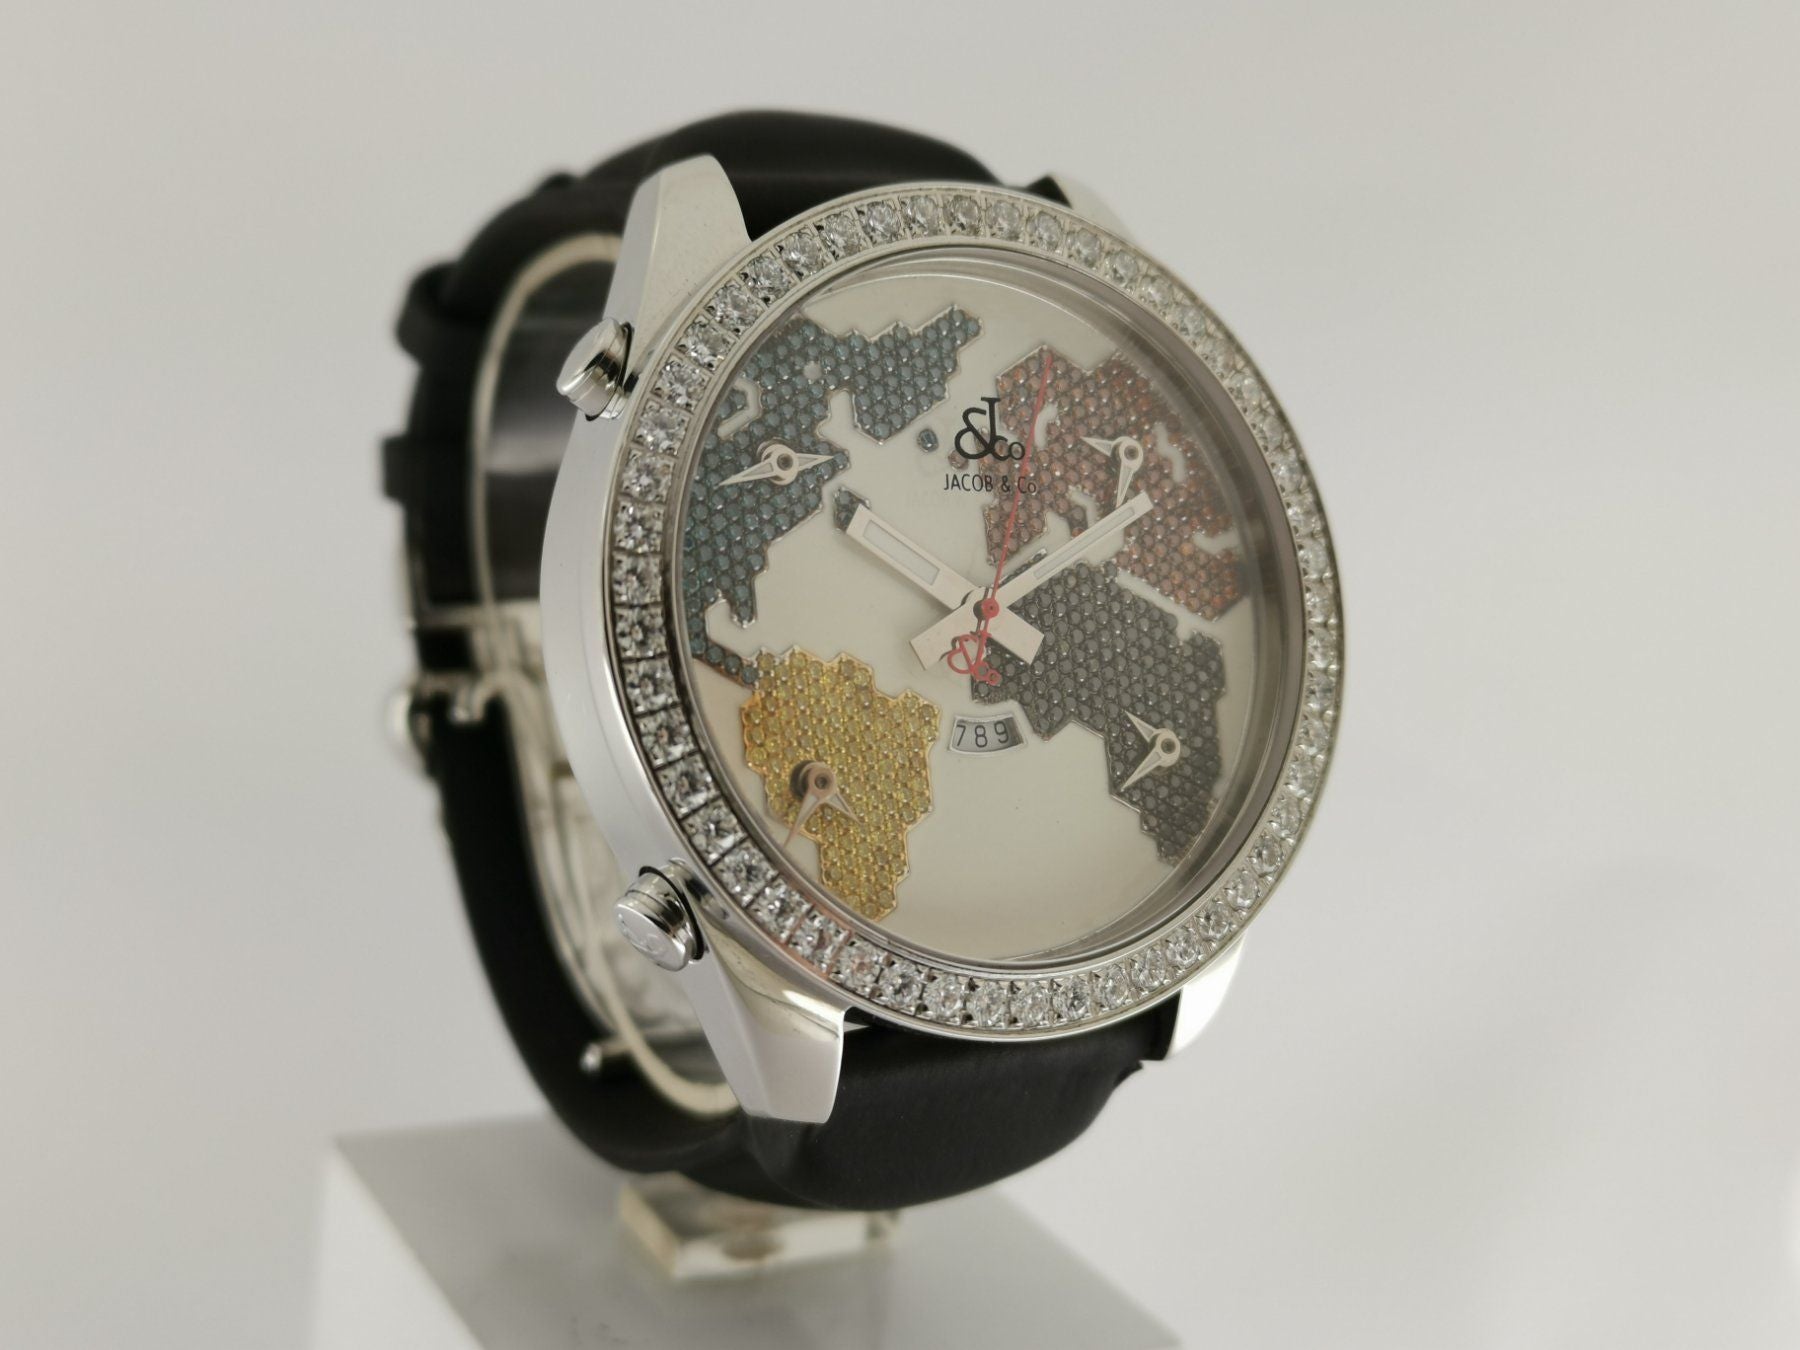 Jacob & Co. Five Time Zone World Is Yours Diamanten